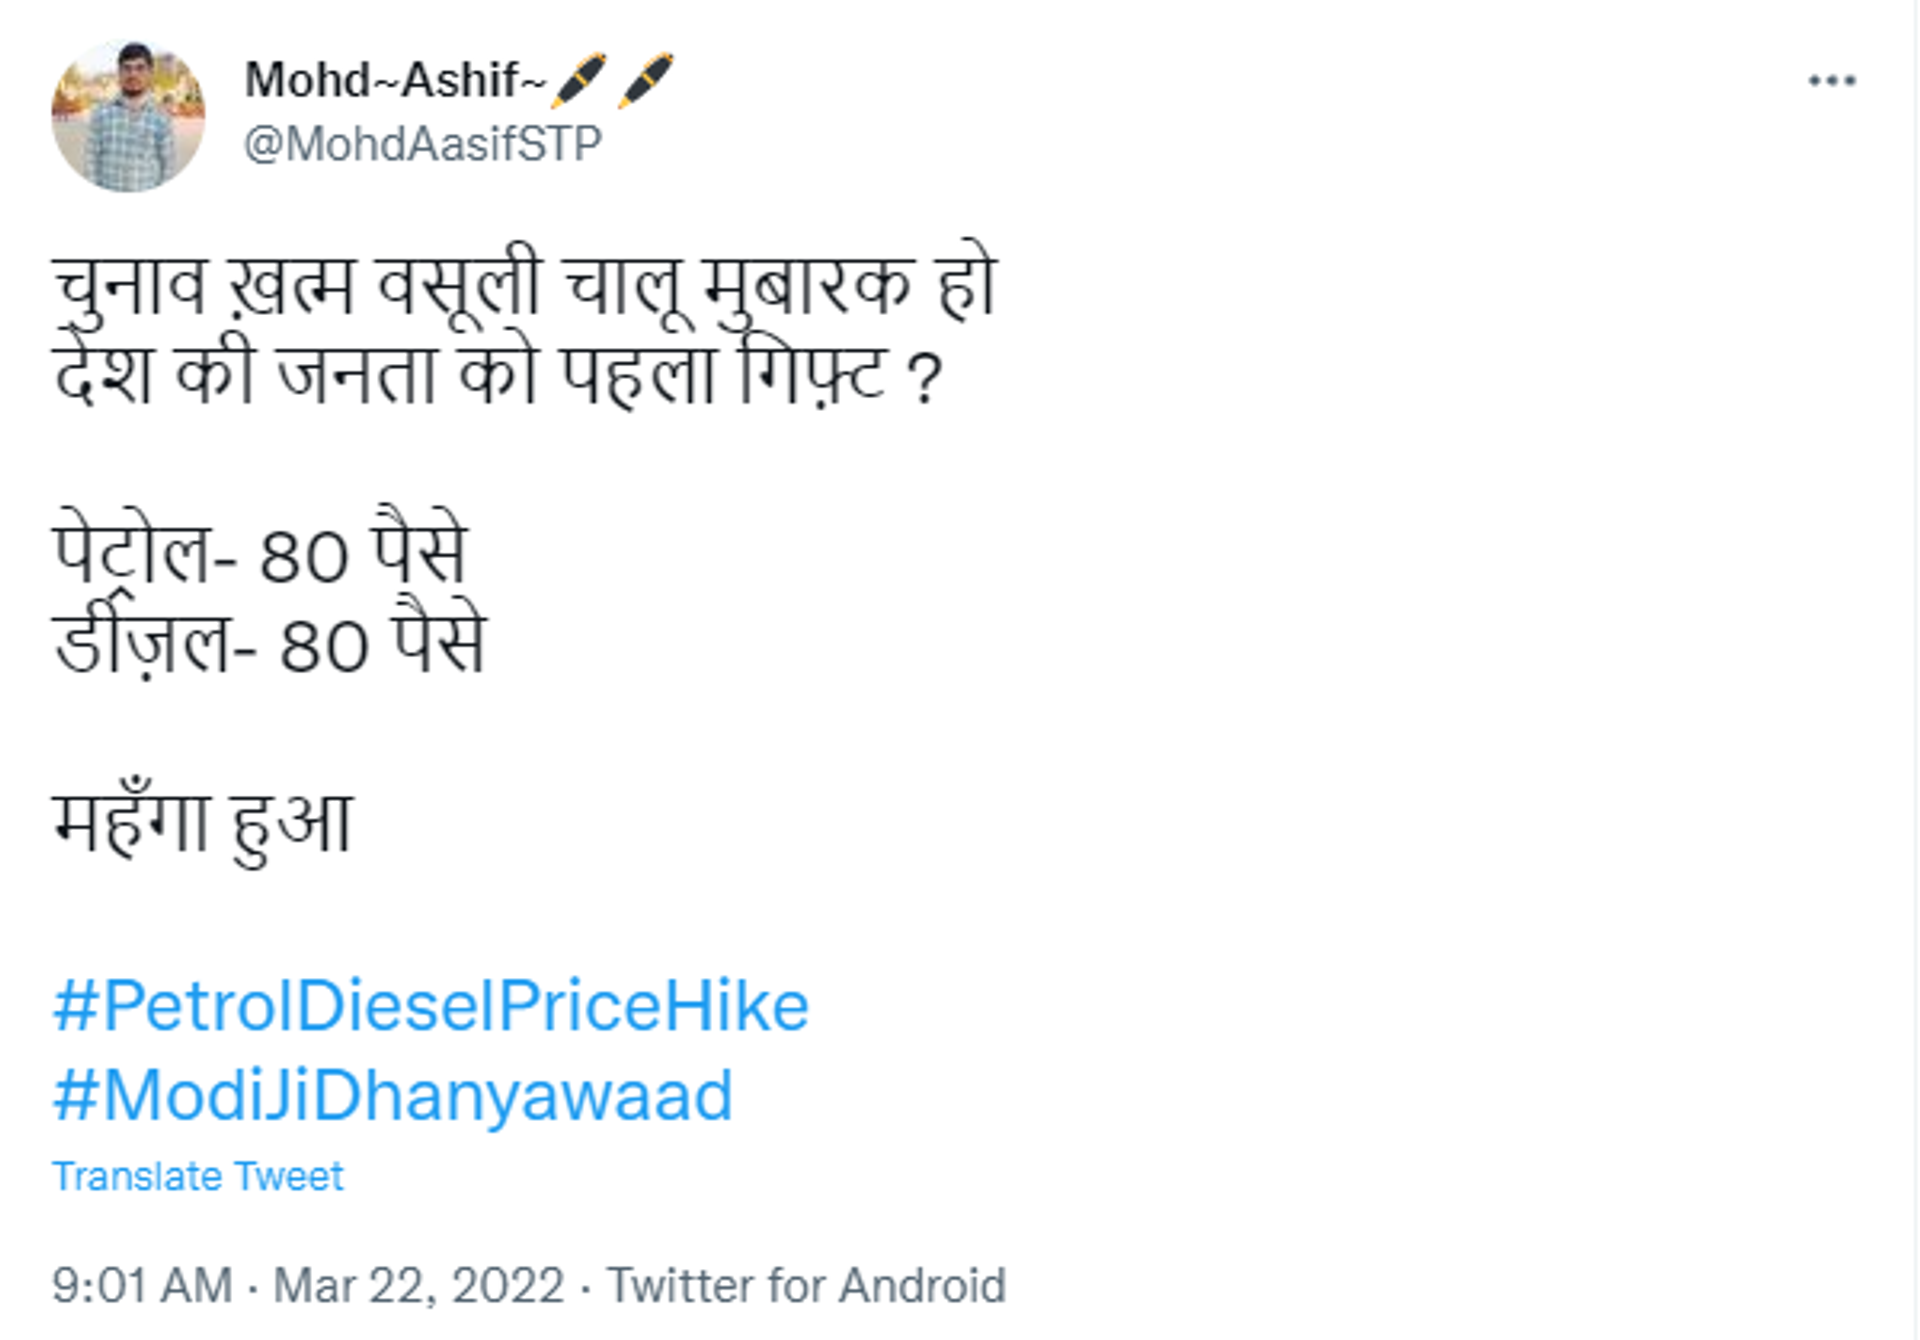 Twitter User Reacts Sharply on Increase in Fuel Prices in India - Sputnik International, 1920, 22.03.2022